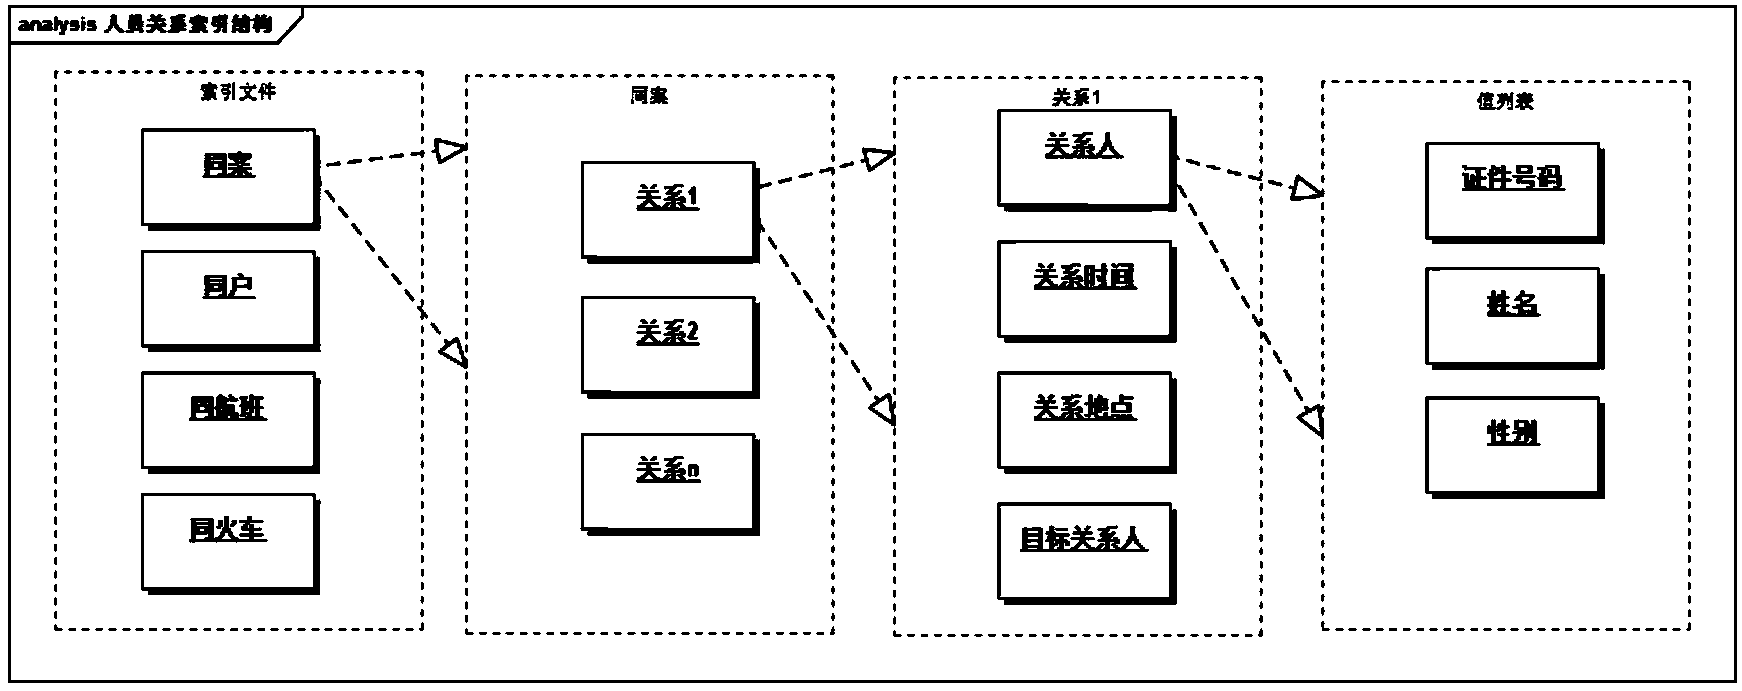 Social-relation network creation and retrieval system and method based on index files